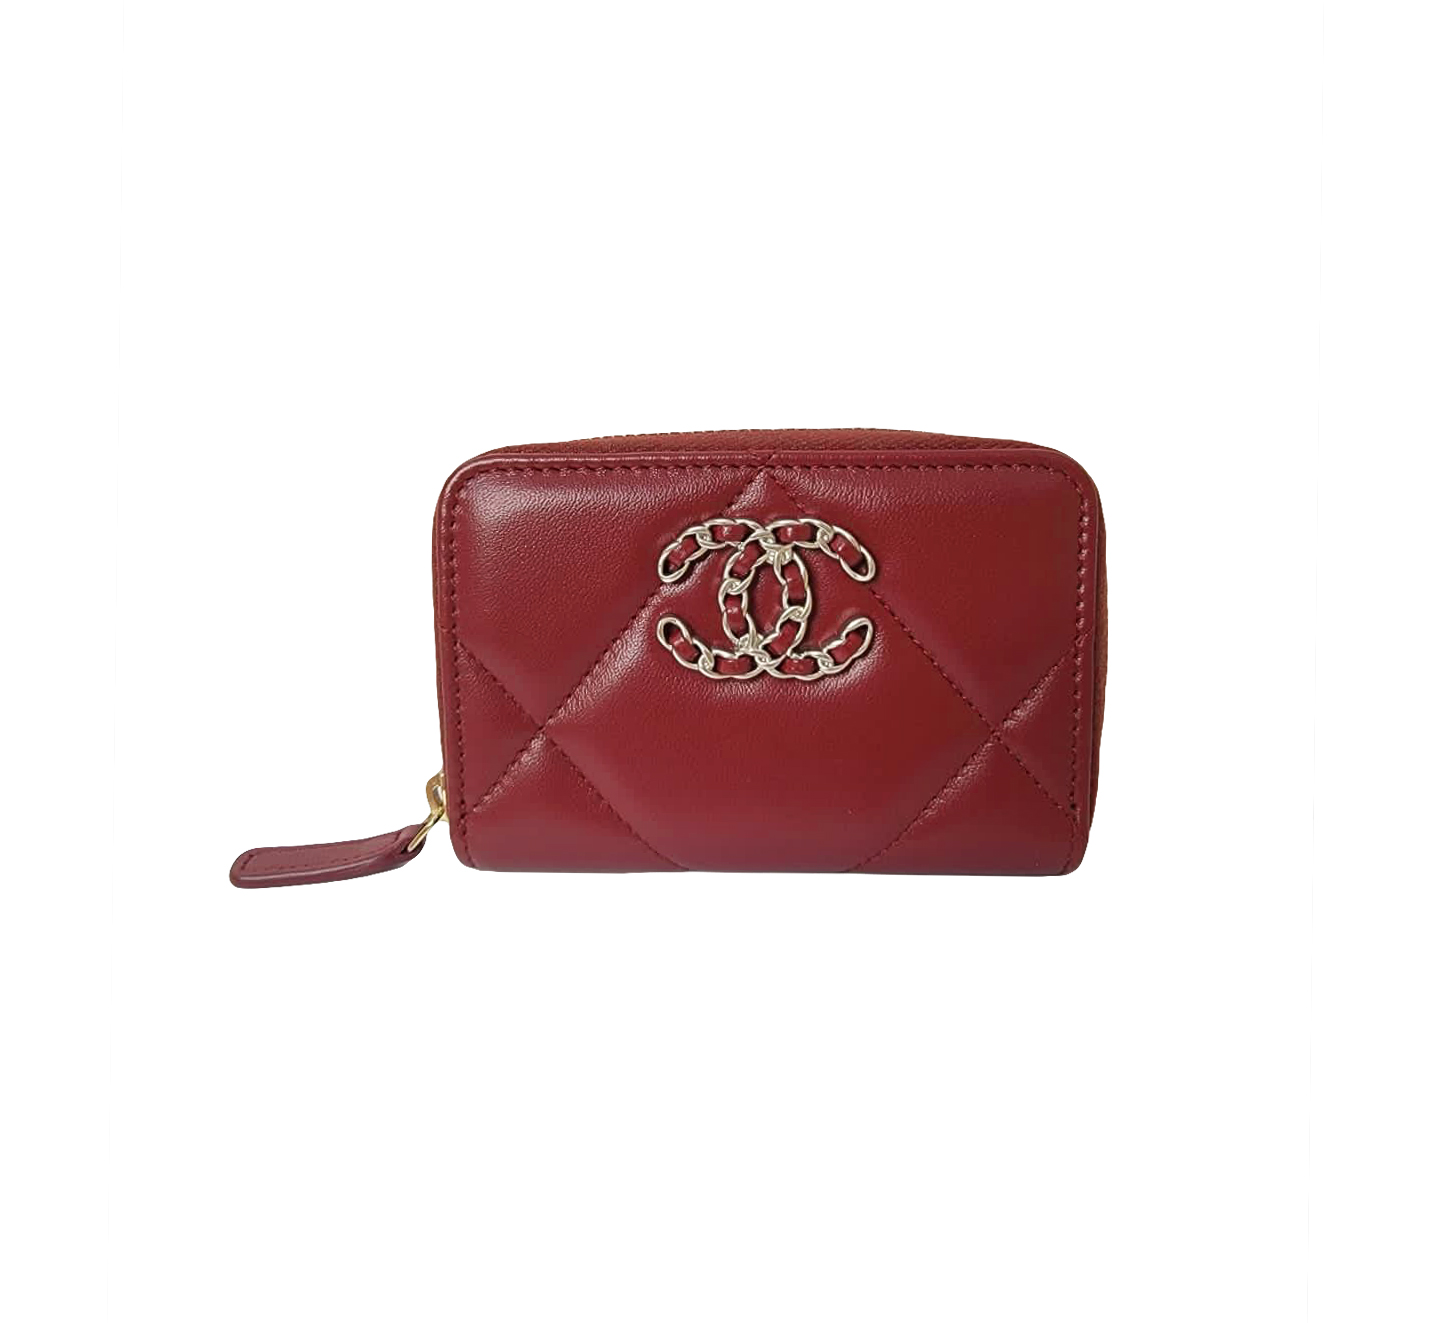 CHANEL 19 ZIPPED COIN PURSE - styleforless